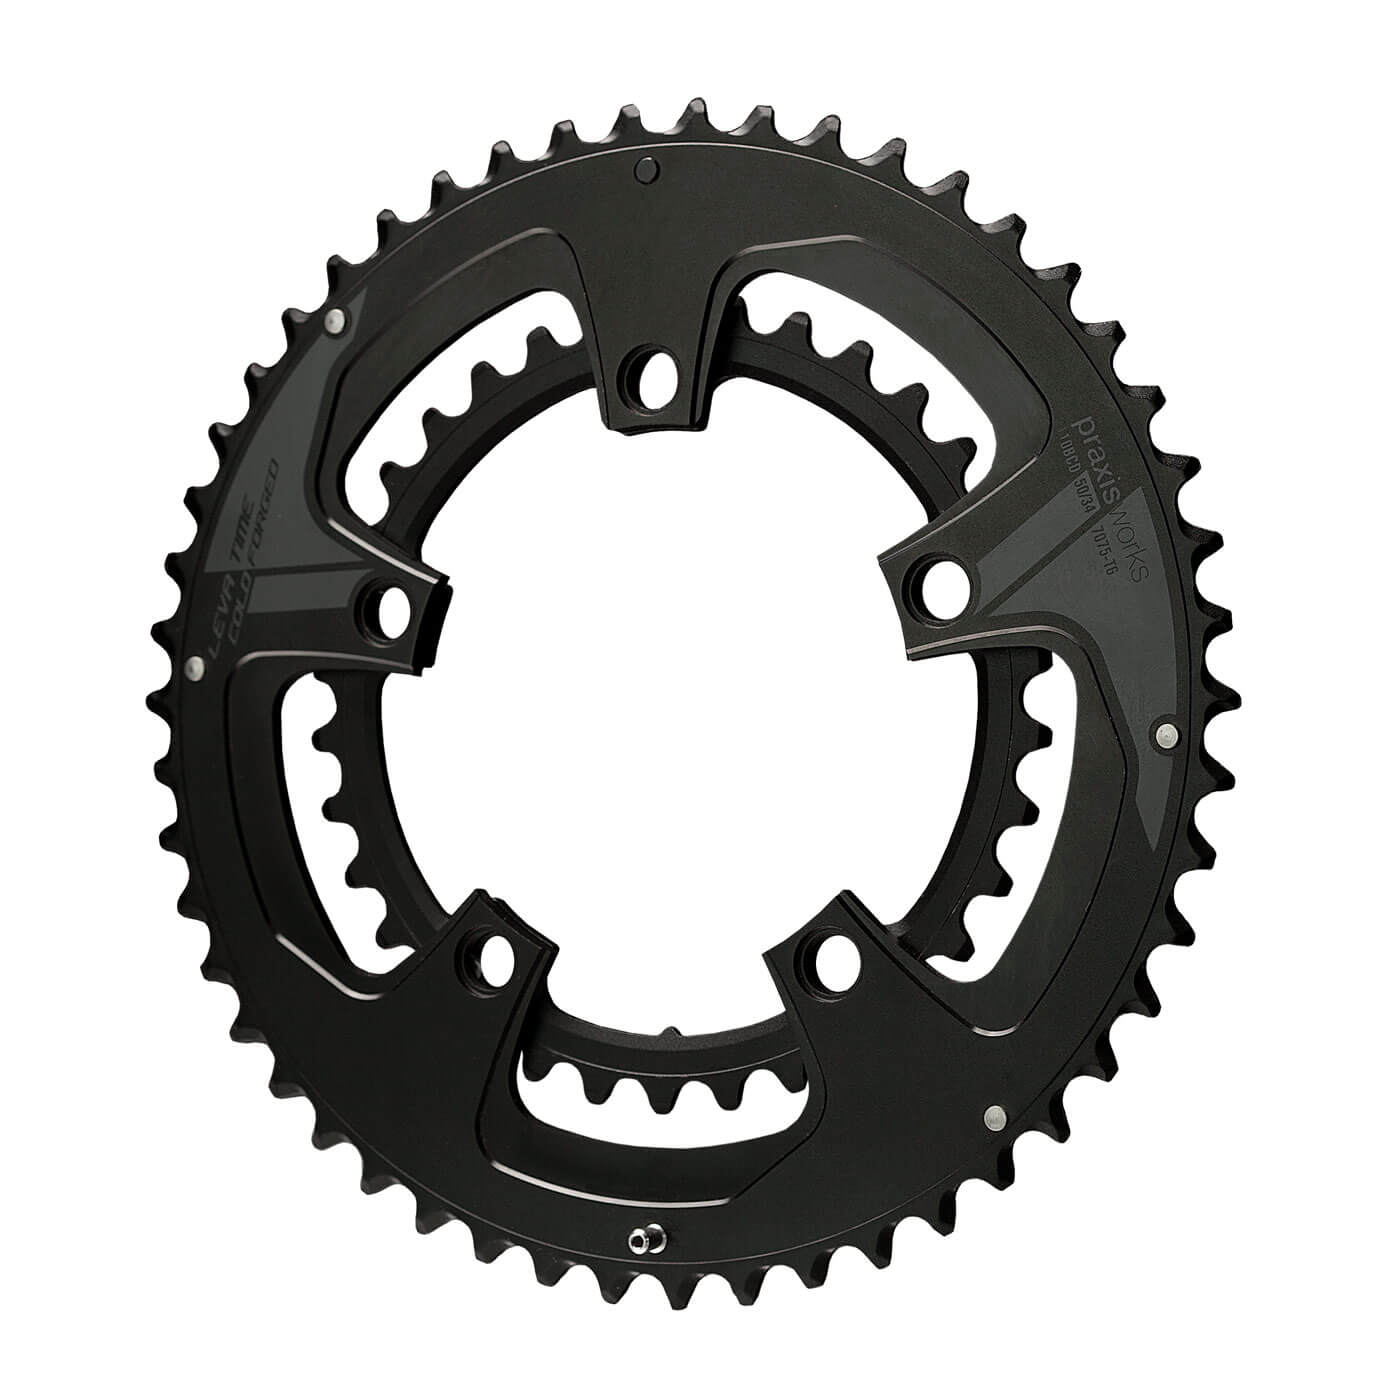 PRAXIS WORKS SUB COMPACT CHAINRINGS – 48/32 CHAINRING COMBINATION FOR LOWER ROAD BIKE GEARING